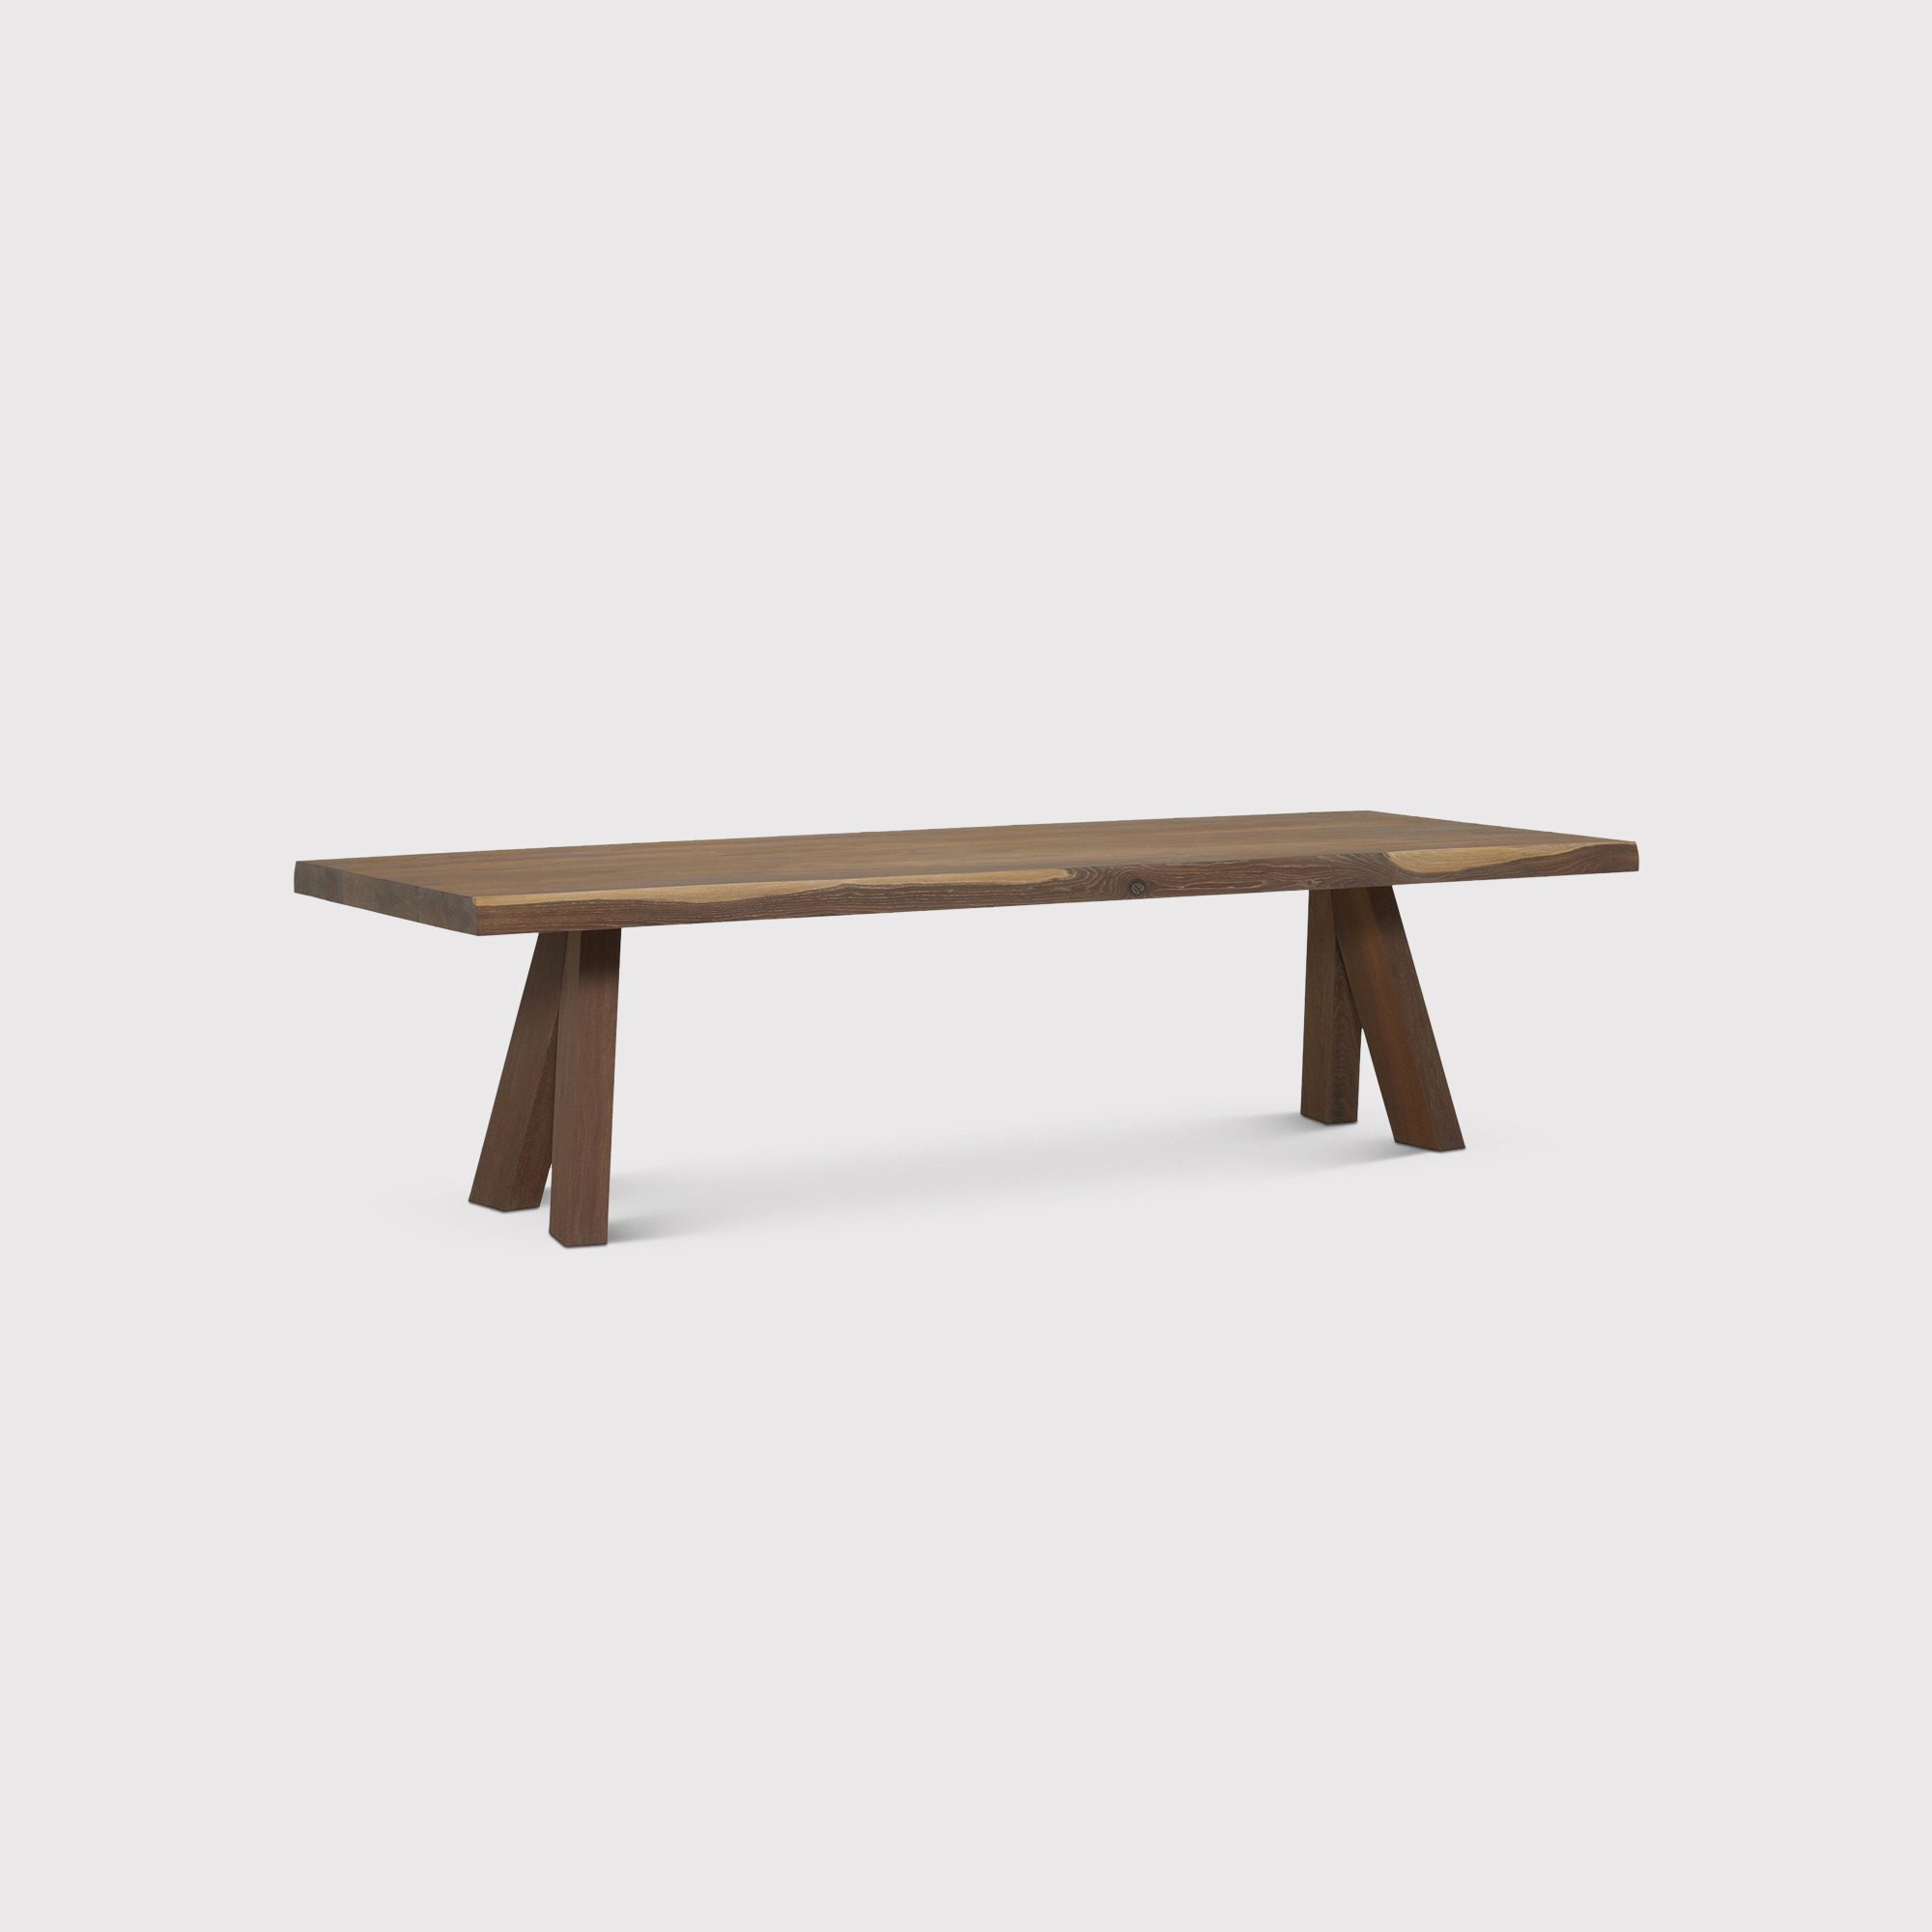 Forte Dining Table up to 305 x 115 x H76.5cm, Oak Wood - Barker & Stonehouse - image 1